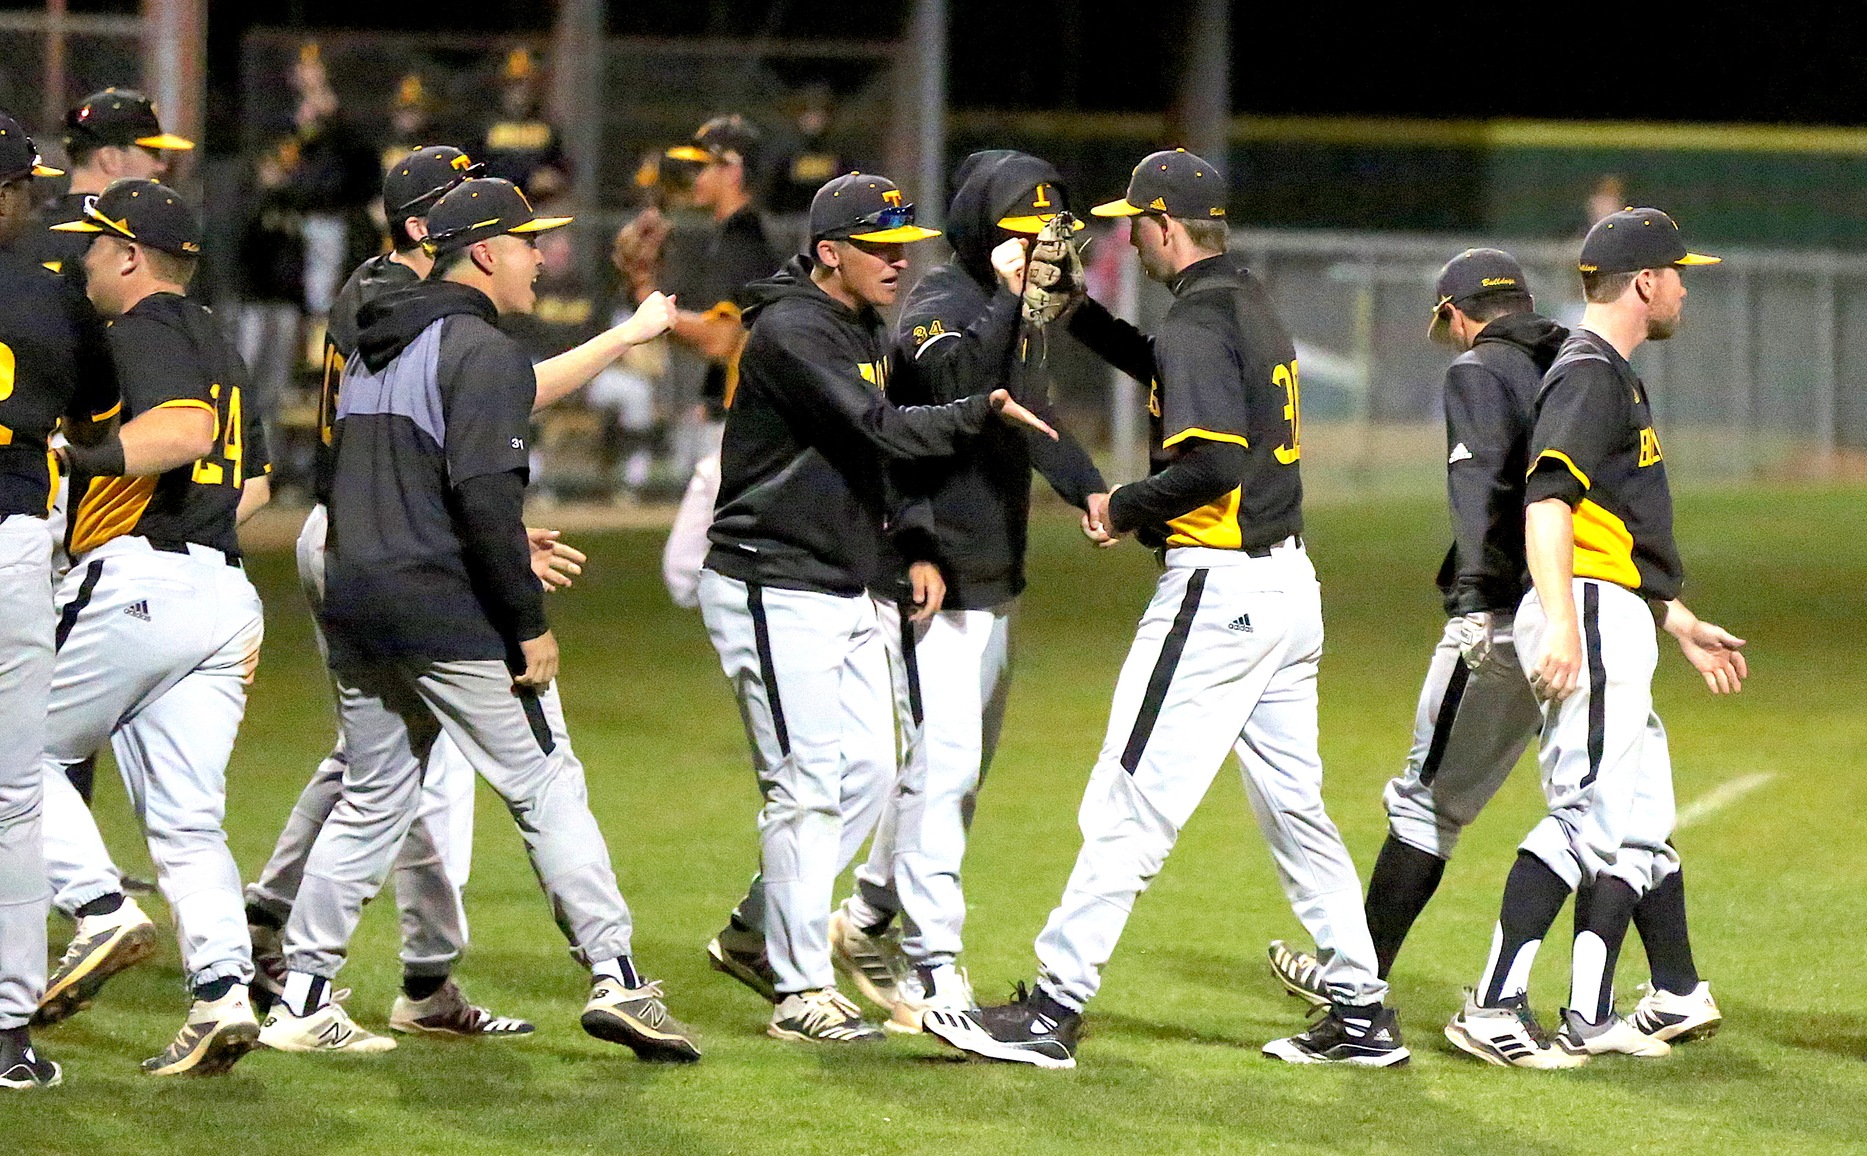 Time/format changes for TLU Baseball's conference series with St. Thomas (Texas)